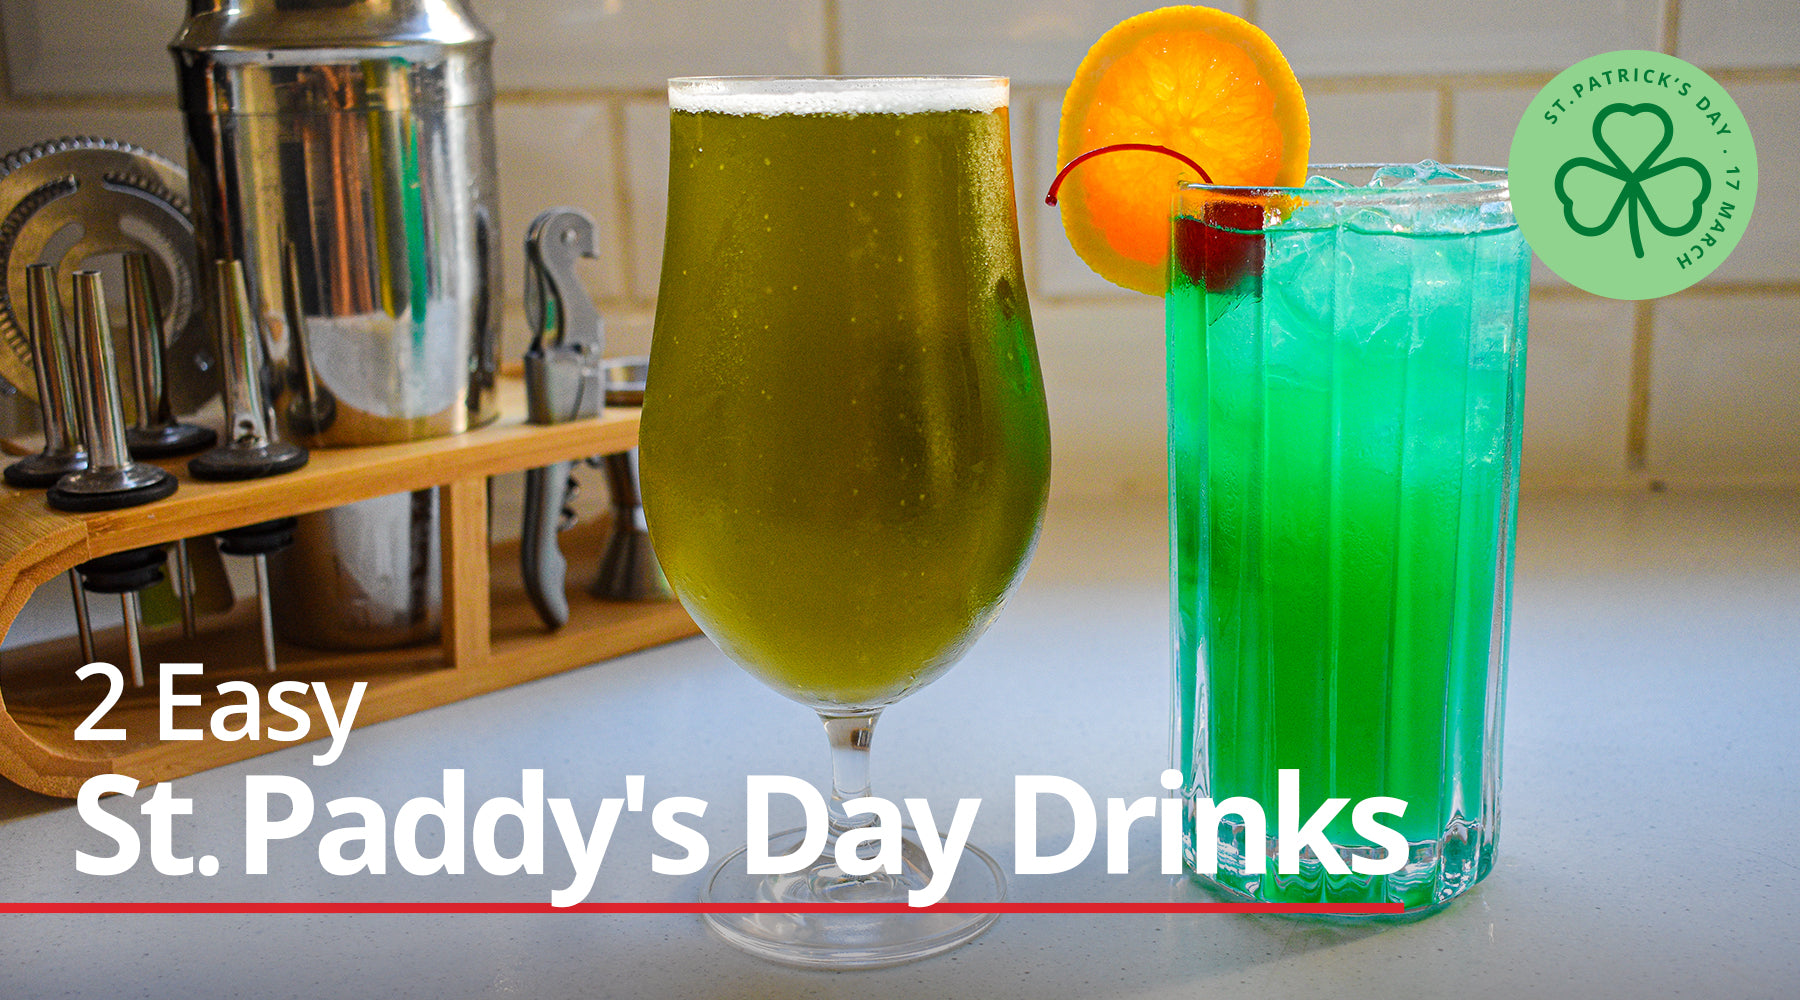 2 Easy St. Paddy's Day Cocktails with Devil's Peak First Light & Monin Blue Curacao